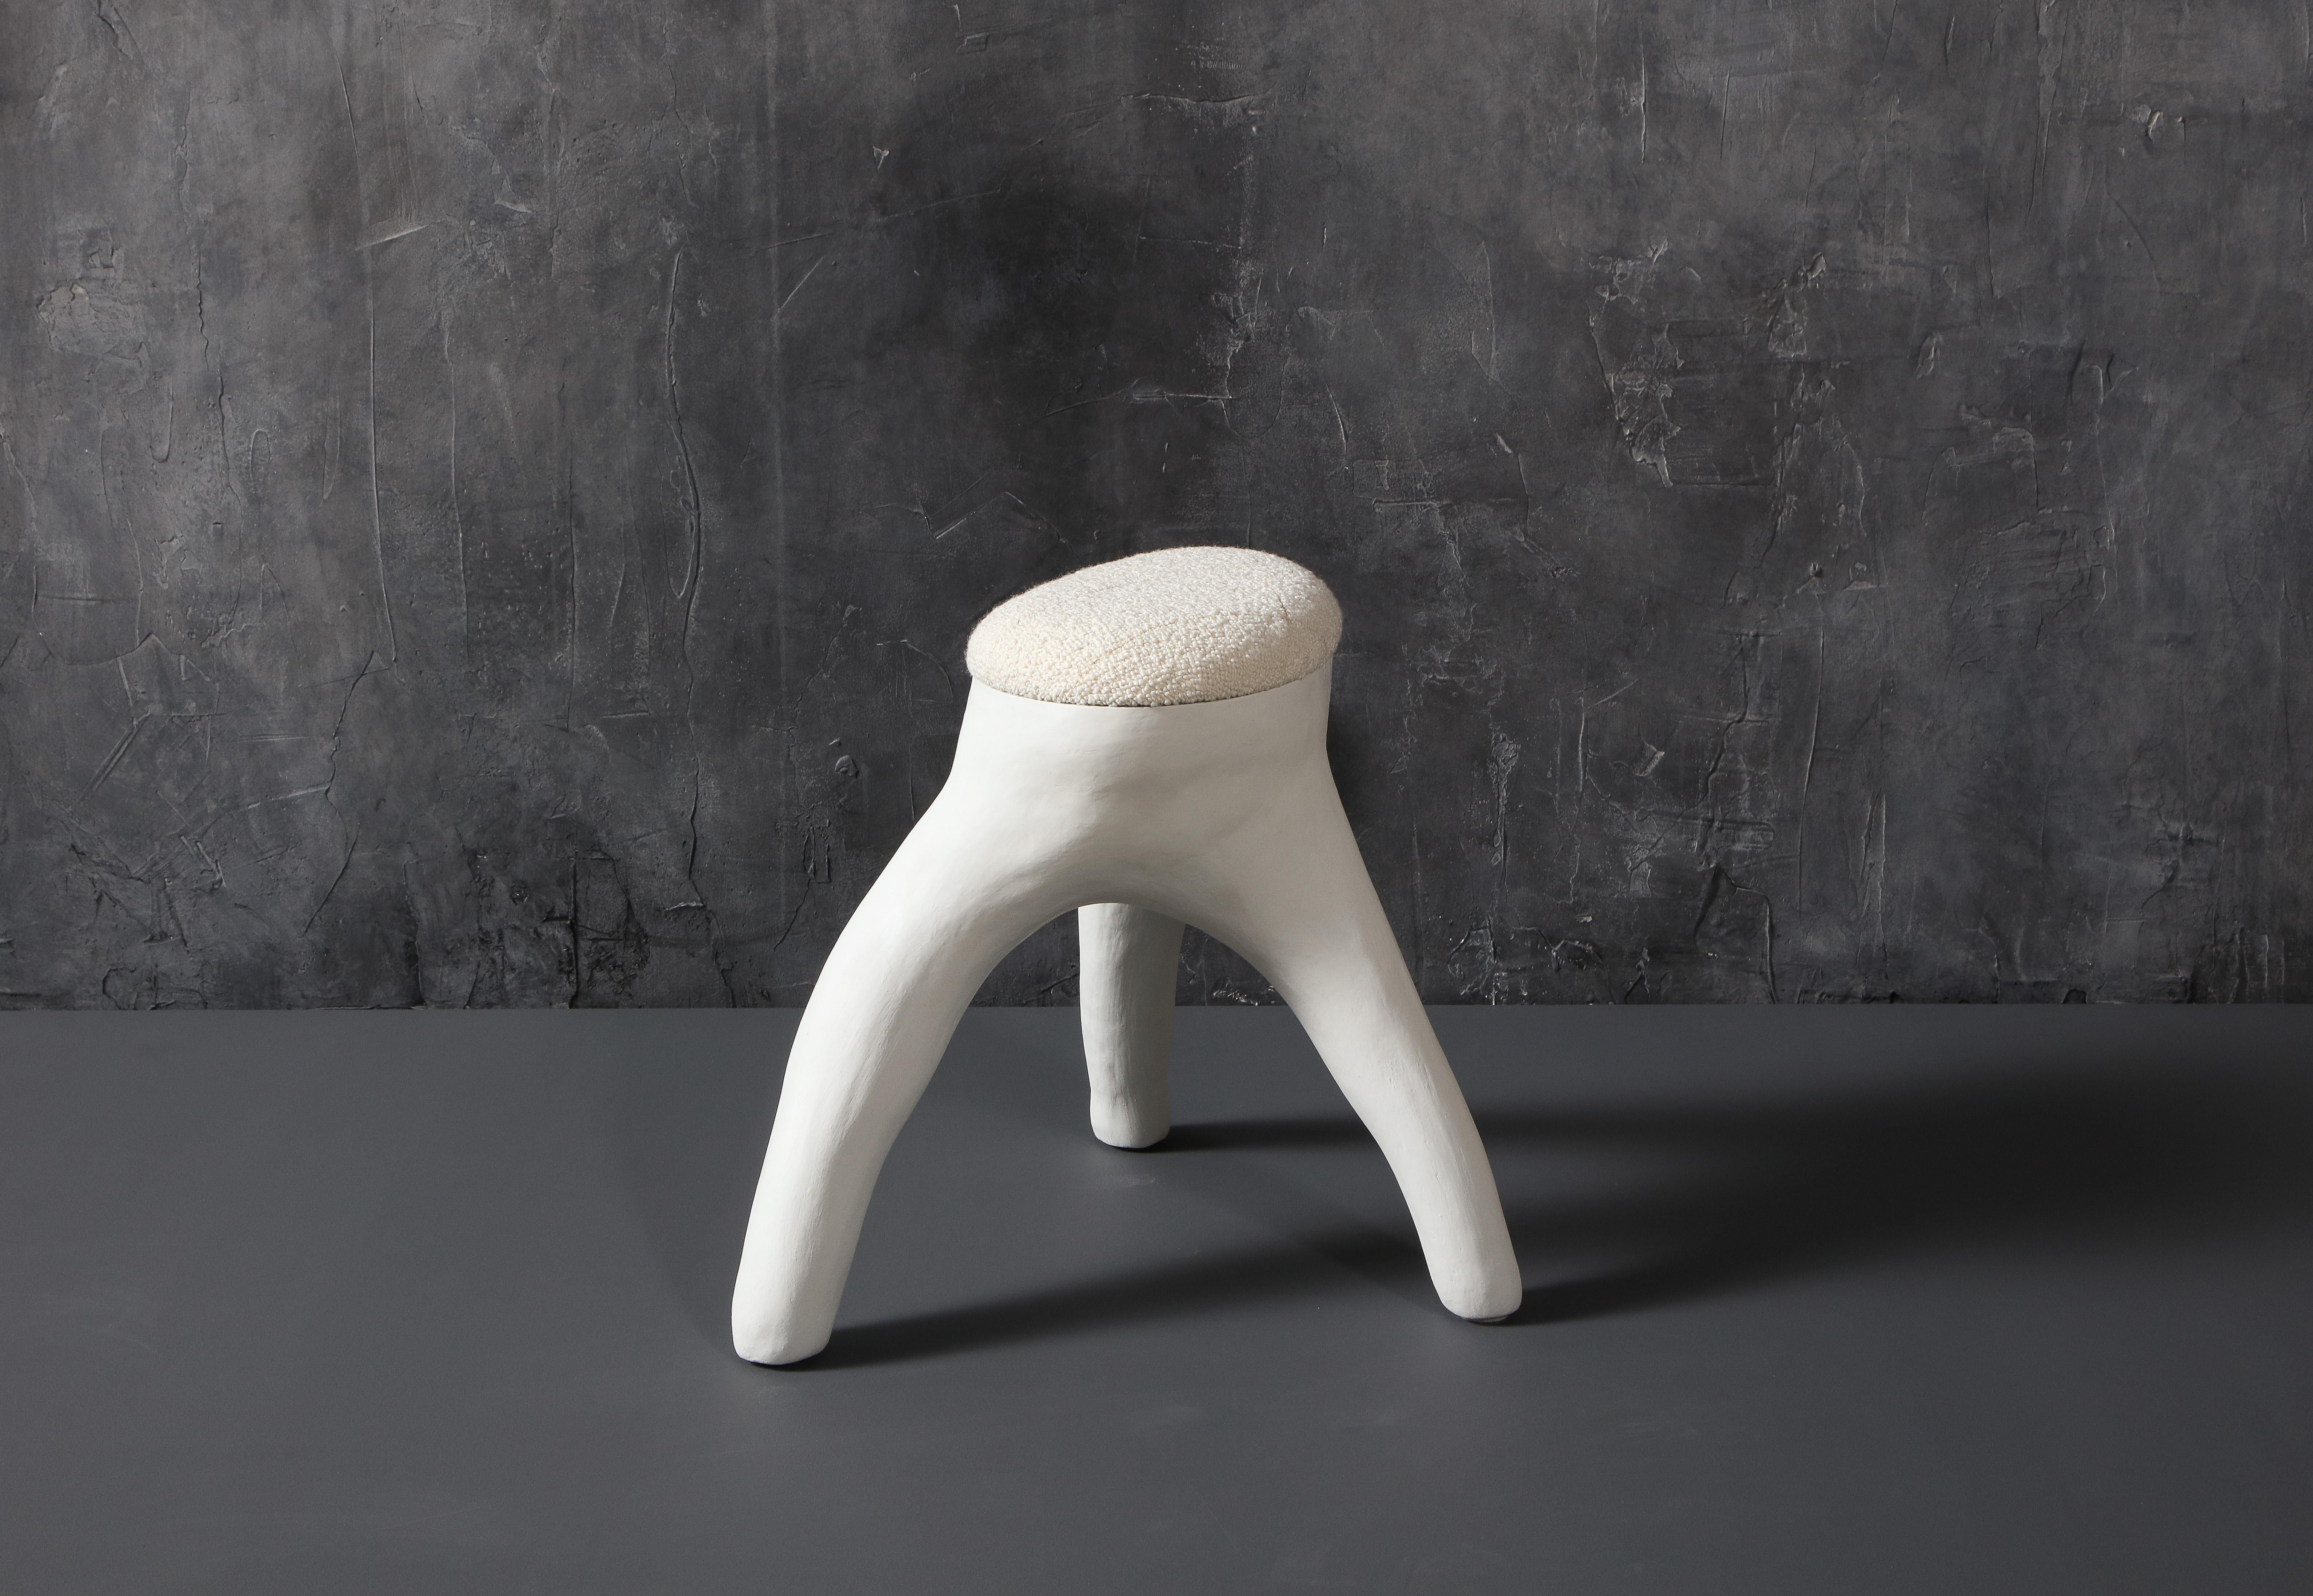 Kavrn stool, 2021.
Polished concrete, upholstery.
18 x 23 x 20 in (top 16 x 10 in).